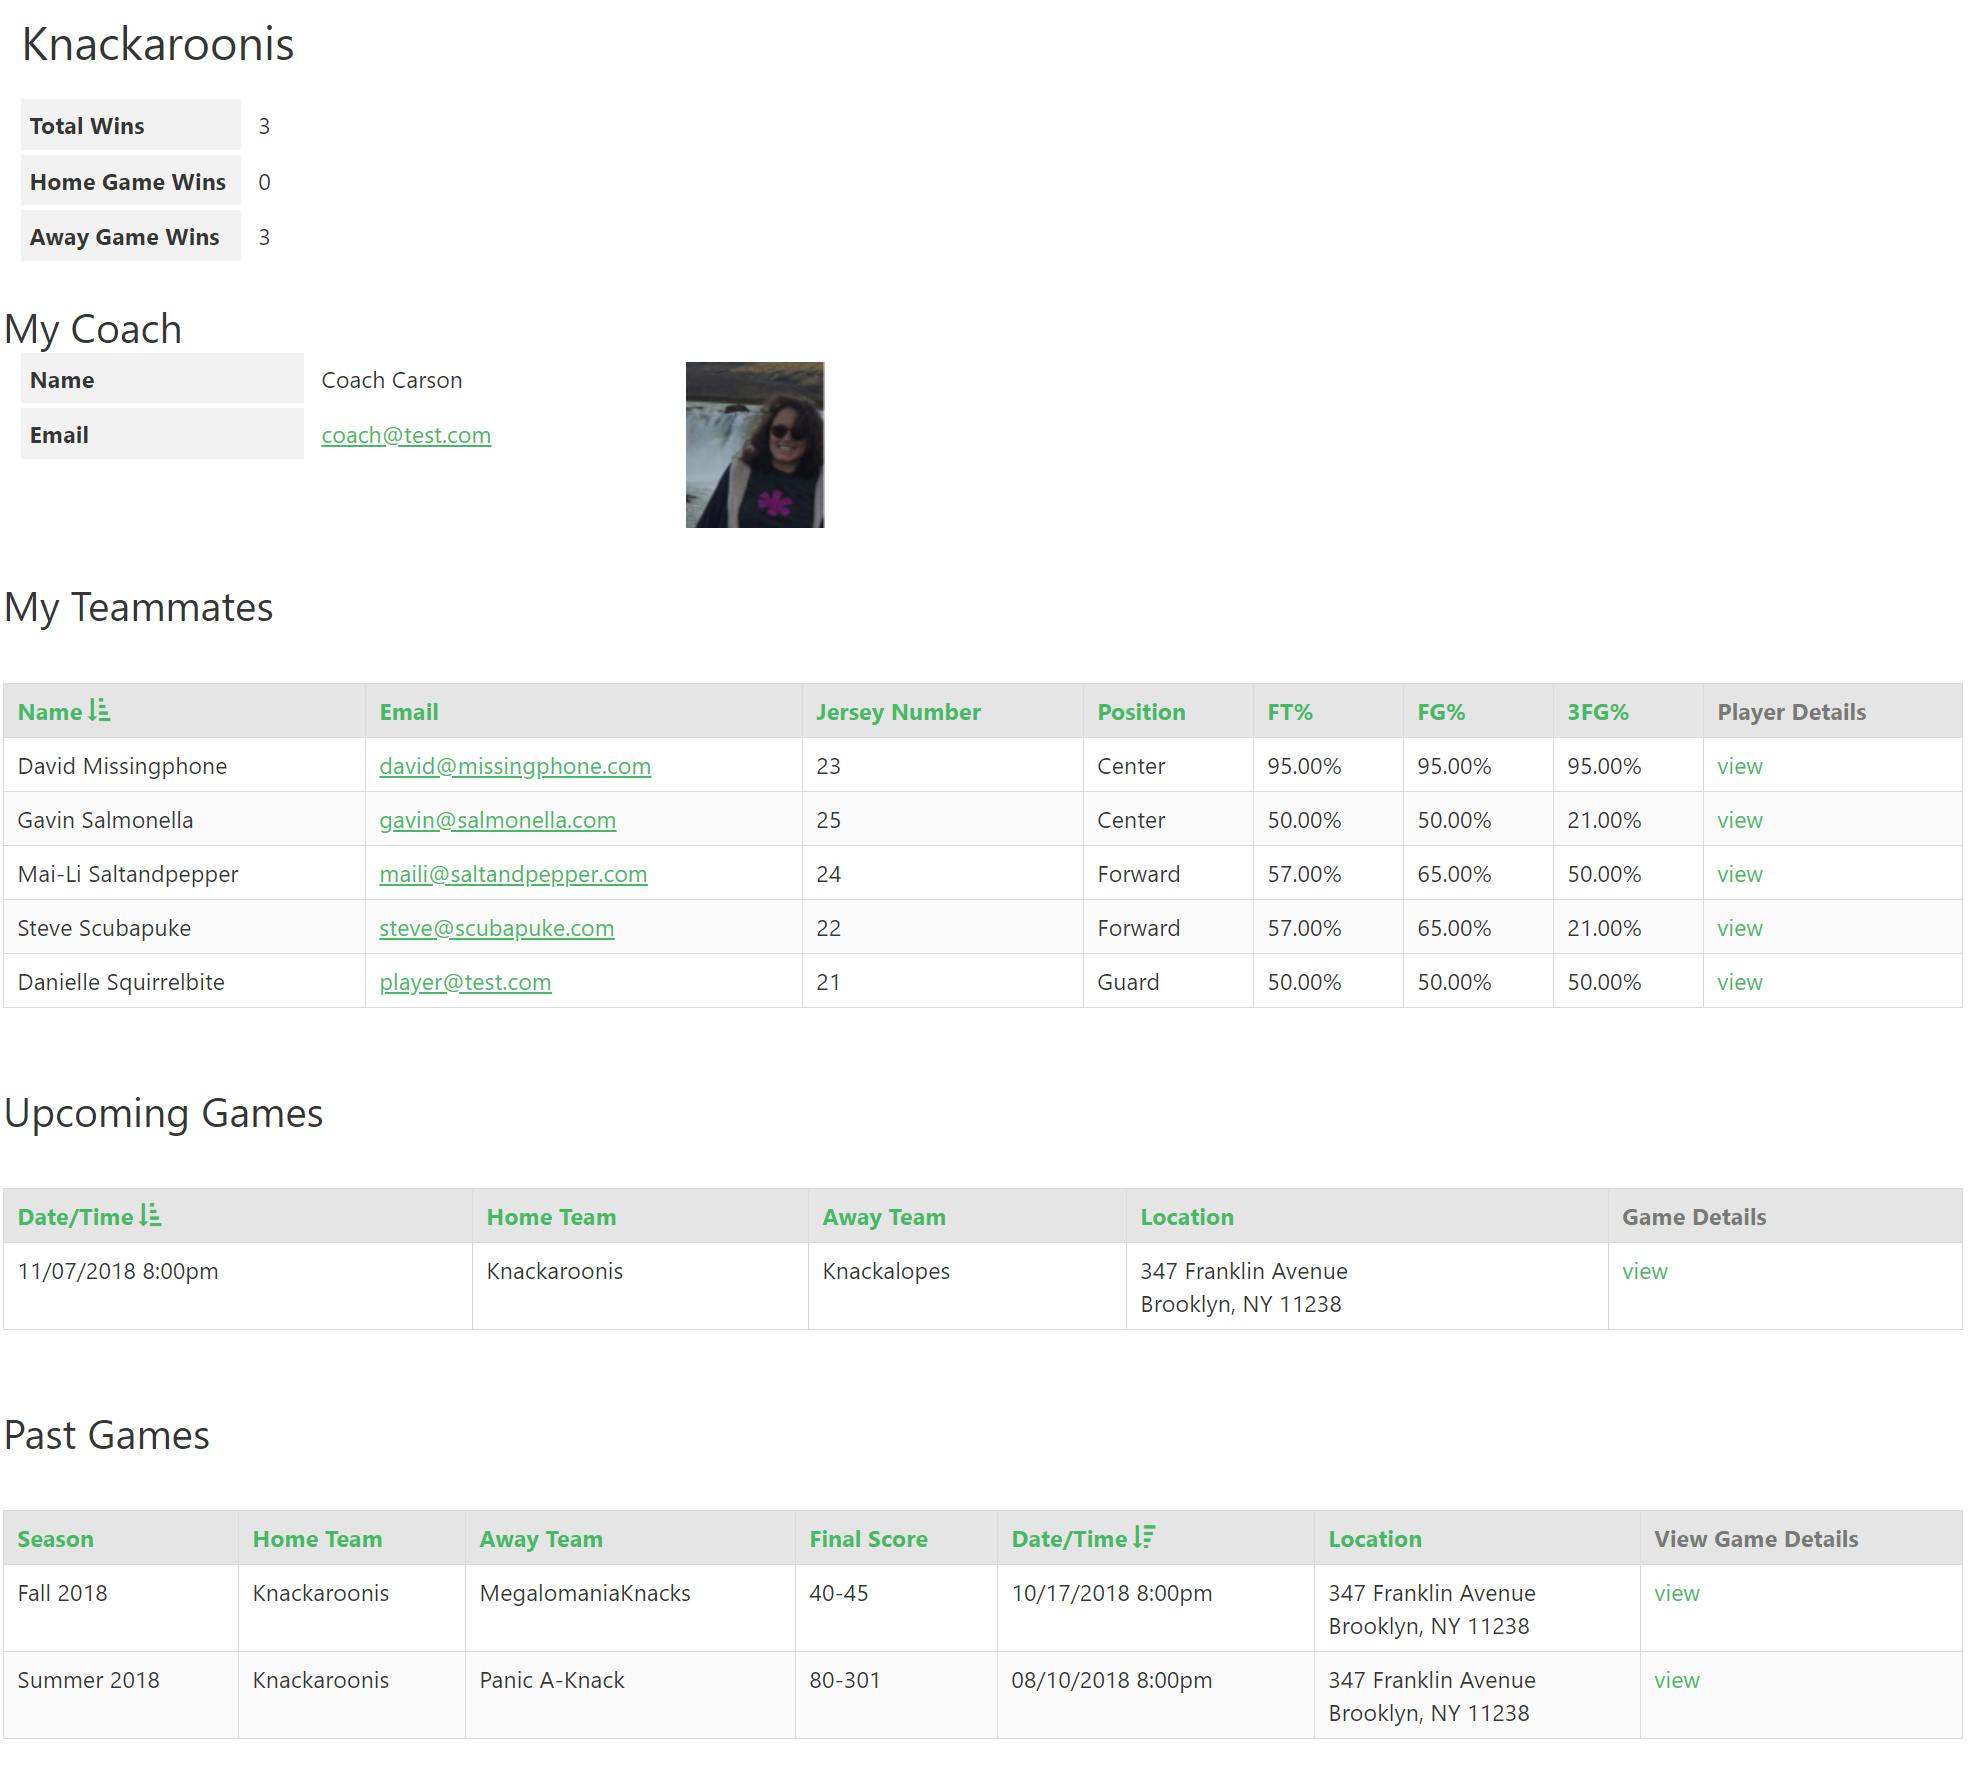 Players can view their team stats, teammates, and games.